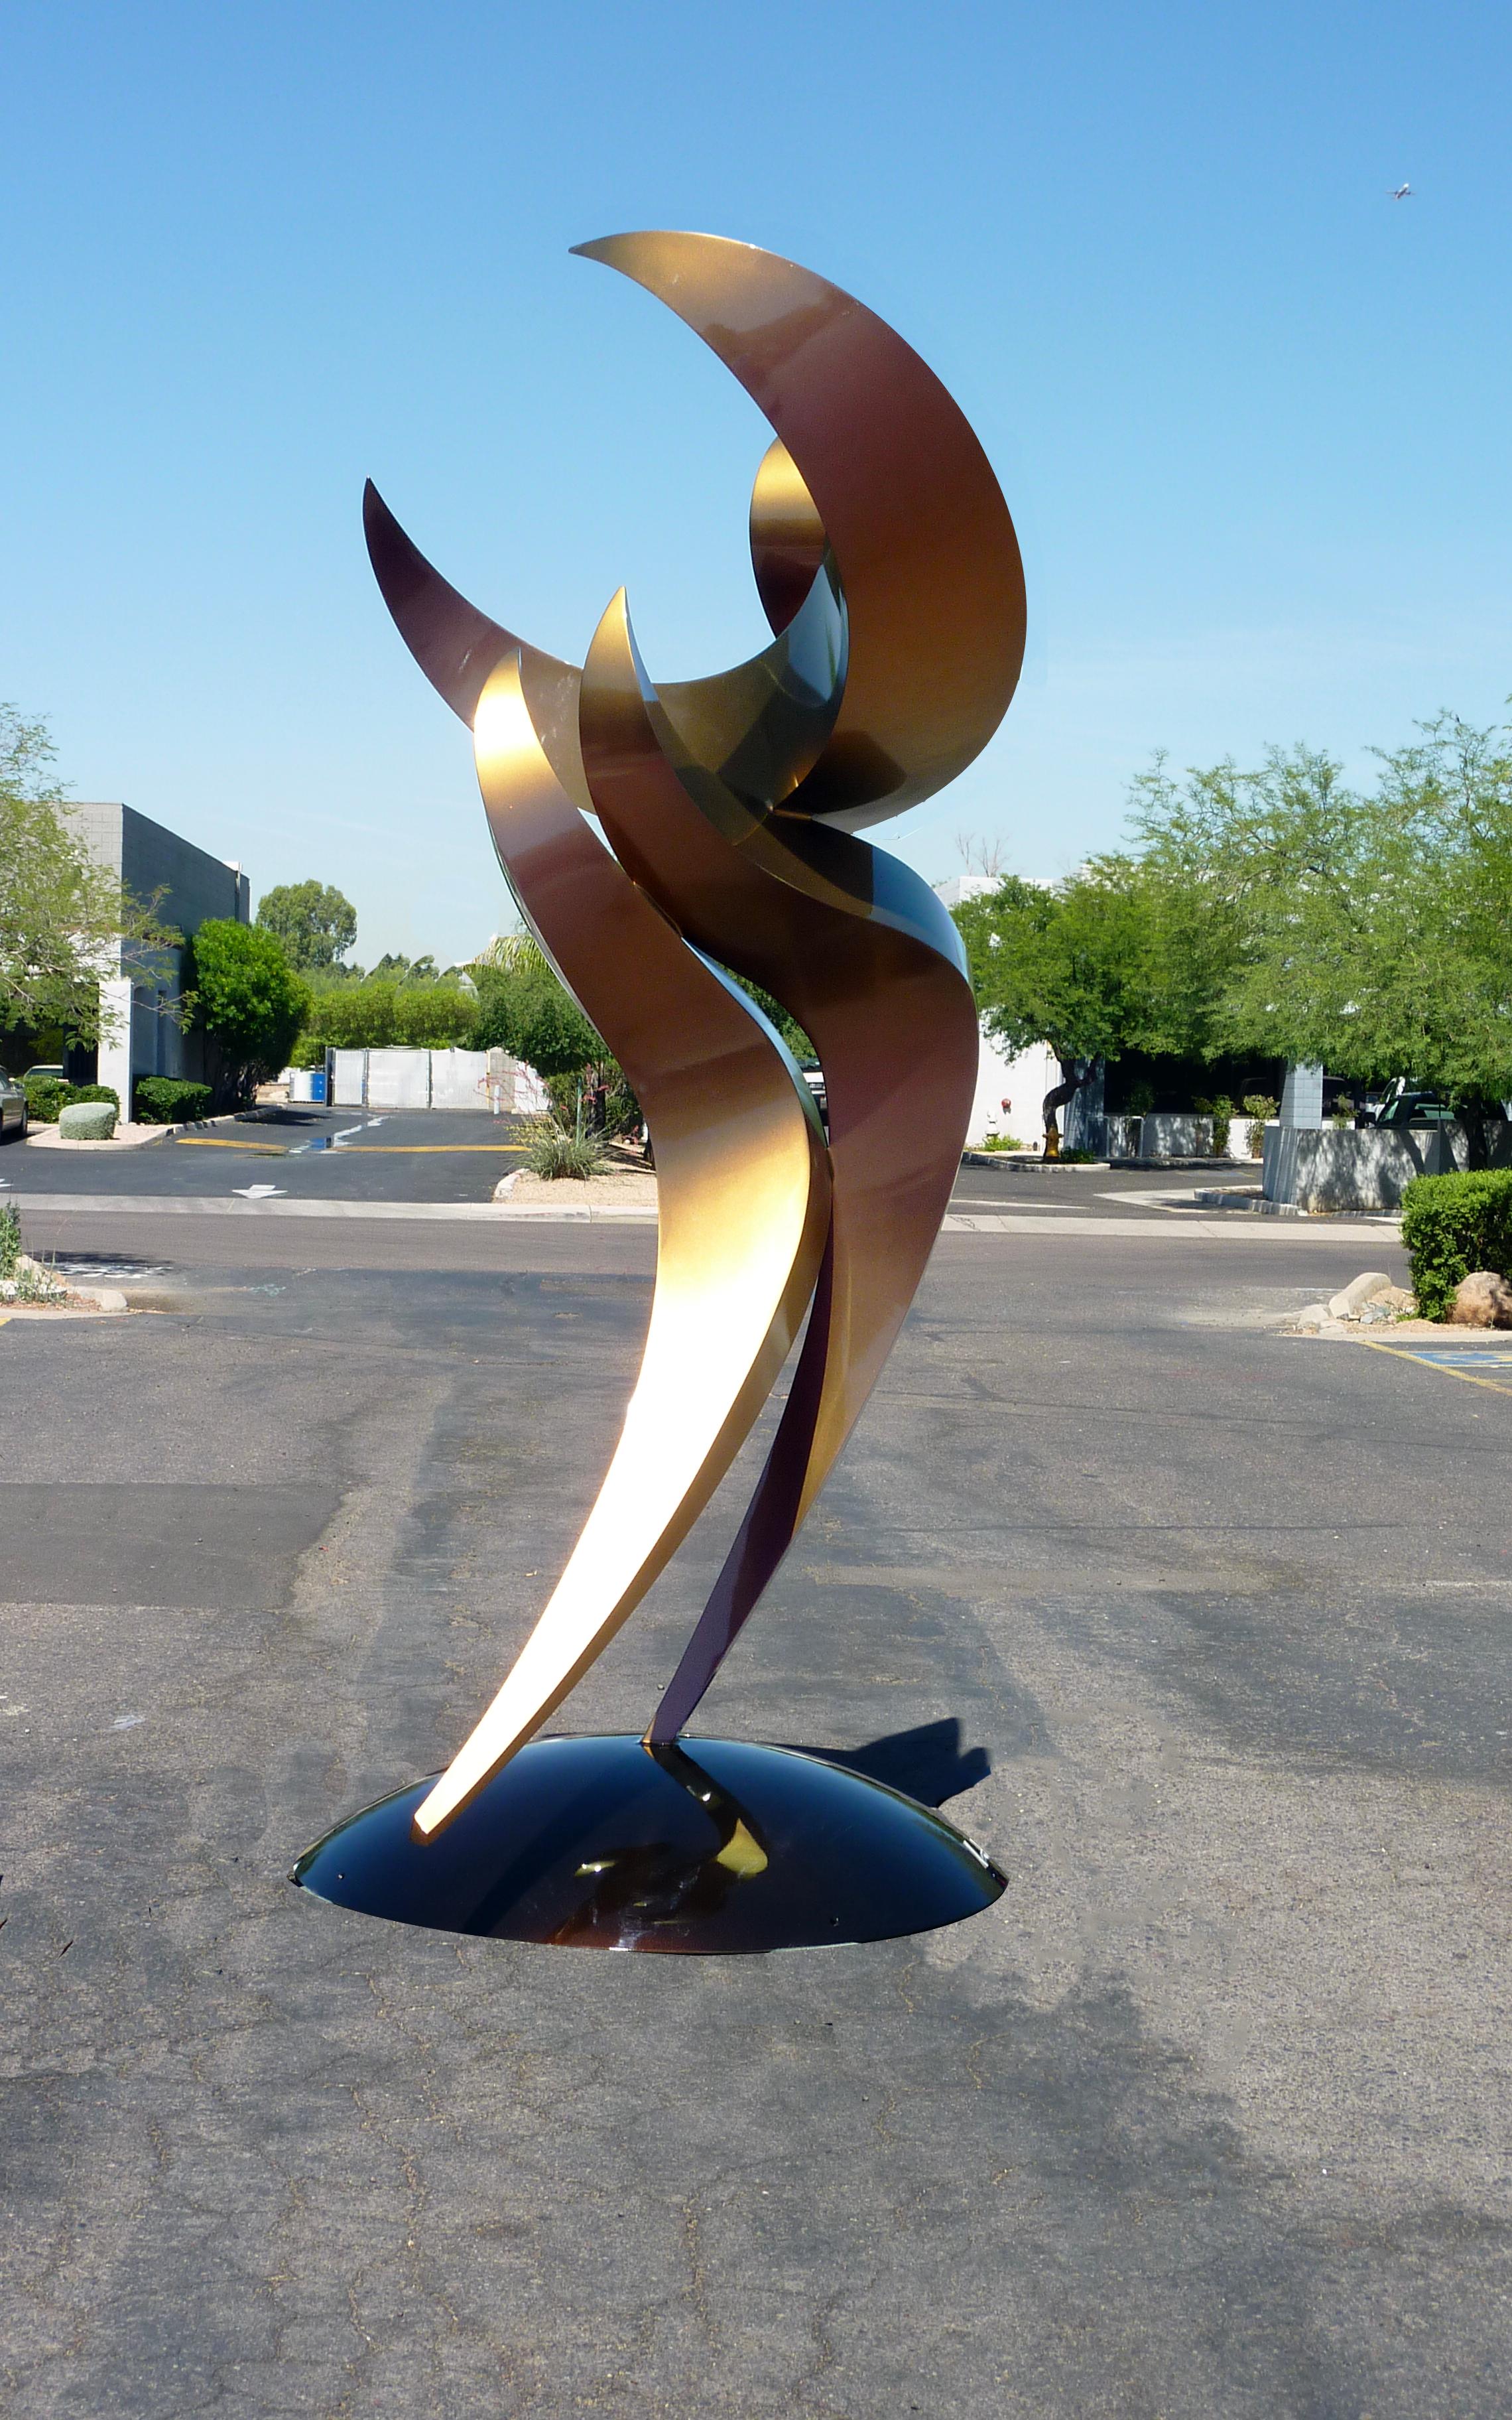 DANCER 6 is one of a series of dancing figures in a style best described as anthropomorphic abstraction.  The piece shown is 10 feet high and is made of aluminum with an automotive bronze/magenta color shift paint and a clear coat.  This piece is